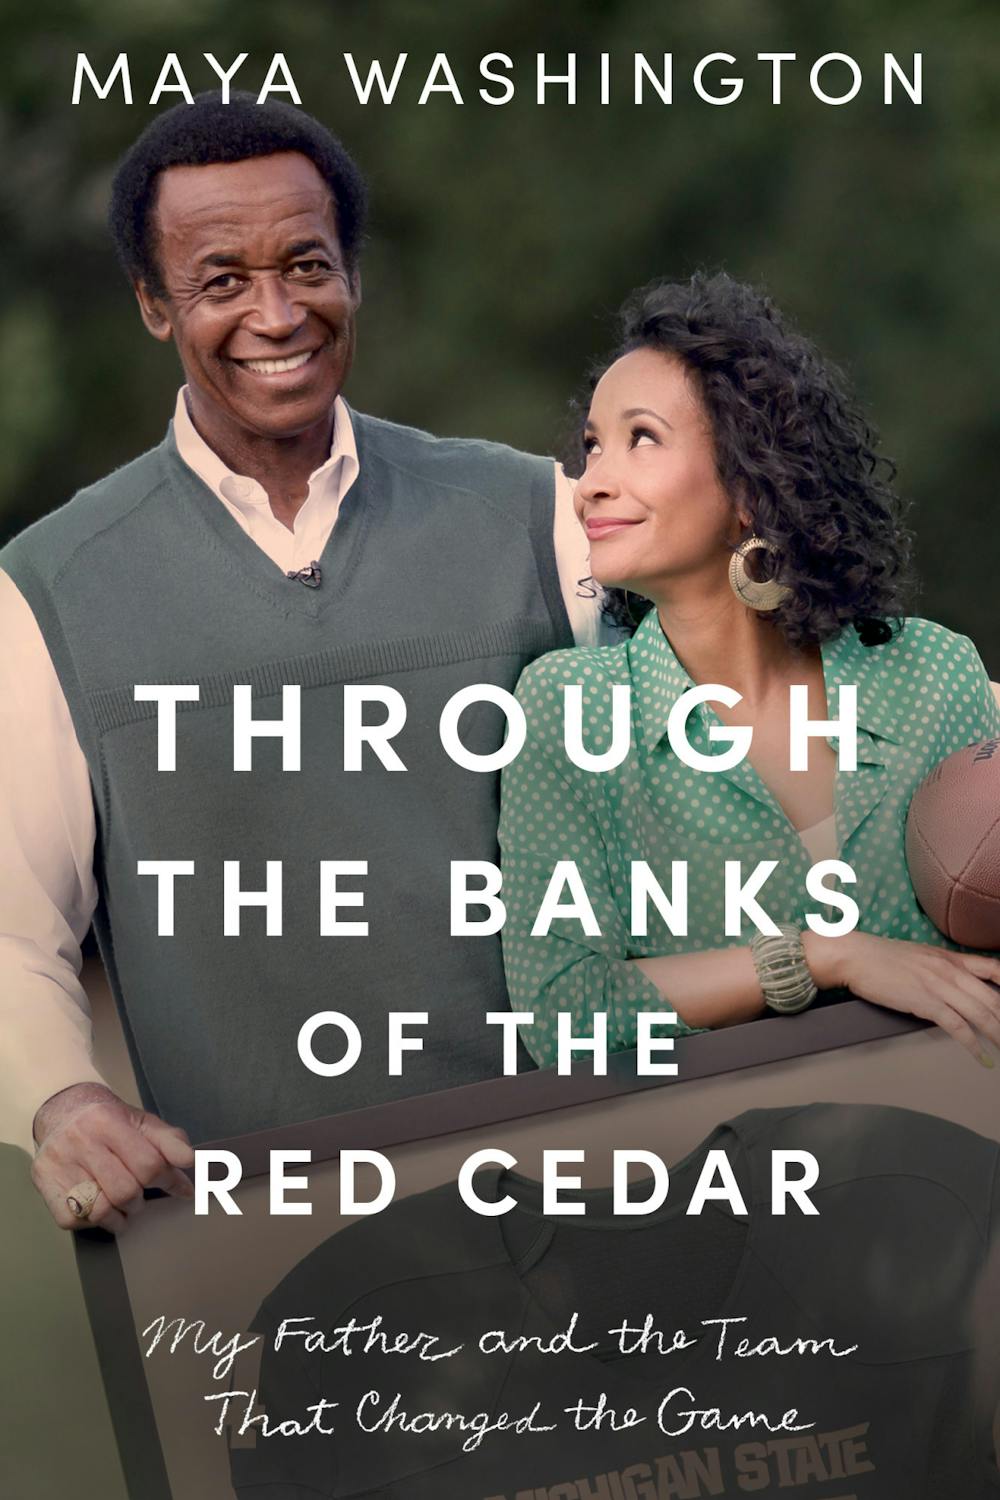 <p>The cover of Maya Washington&#x27;s new book &quot;Through the Banks of the Red Cedar.&quot;</p>